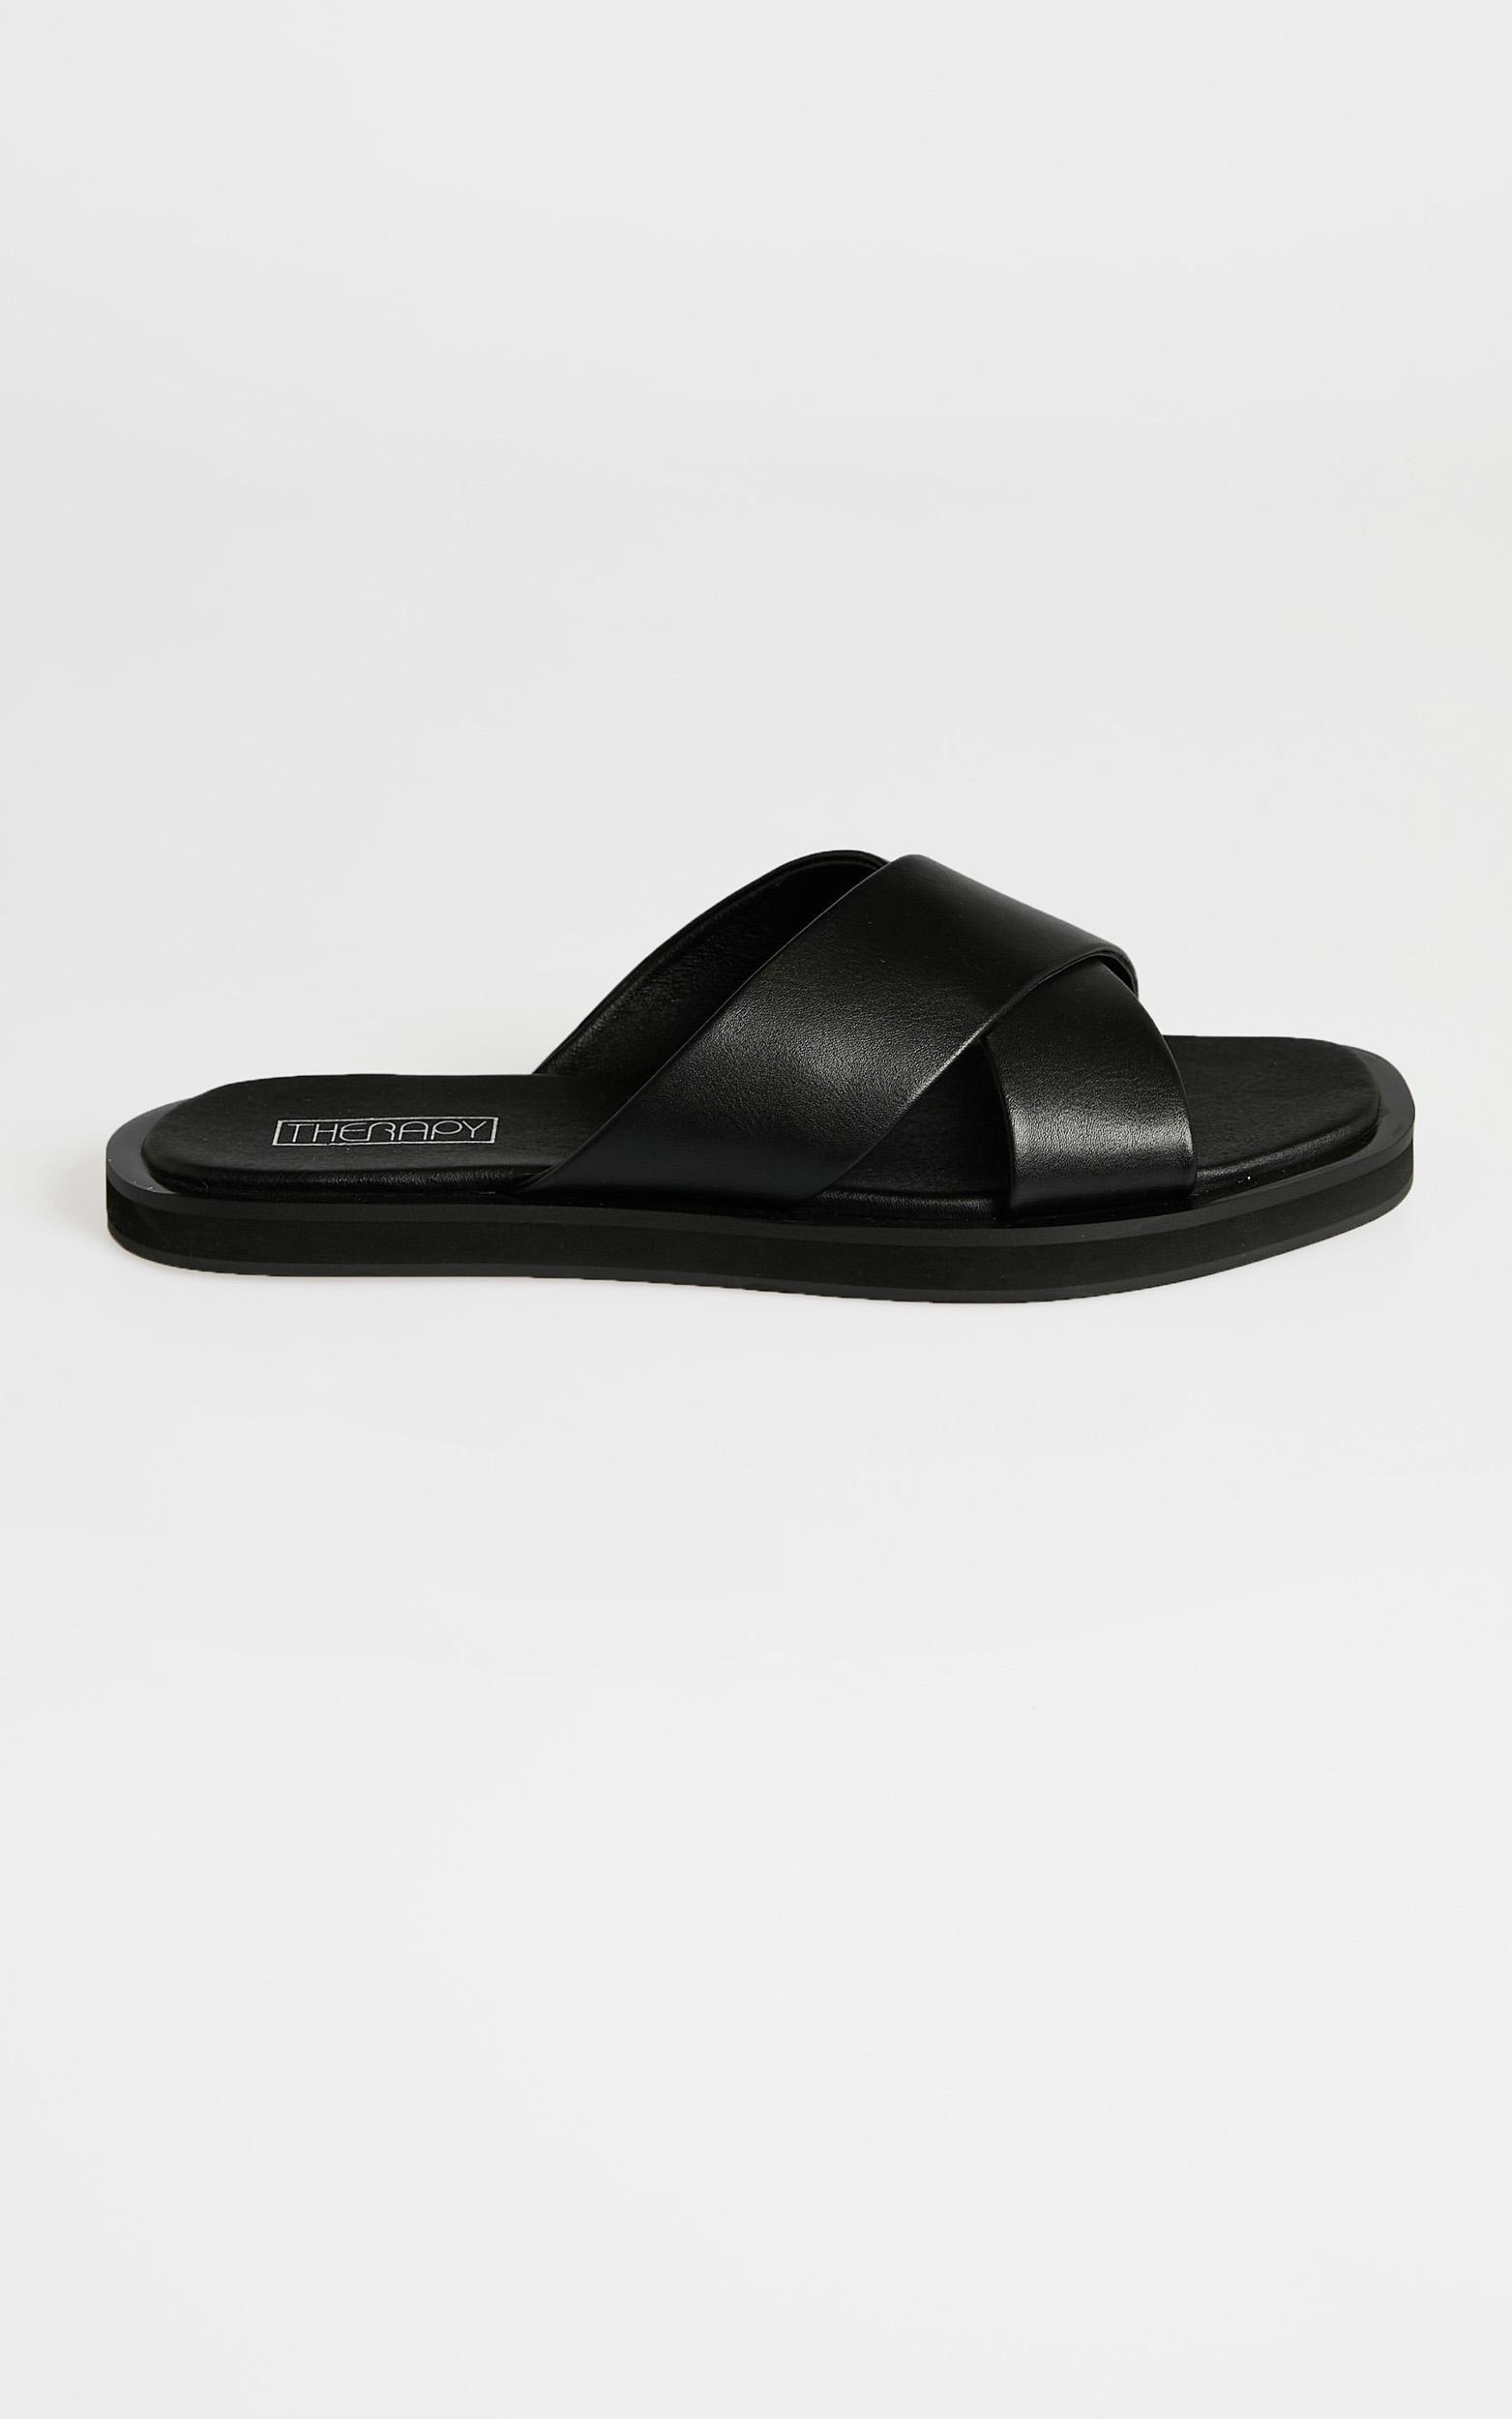 Therapy - Rosey Slides in Black - 05, BLK1, hi-res image number null